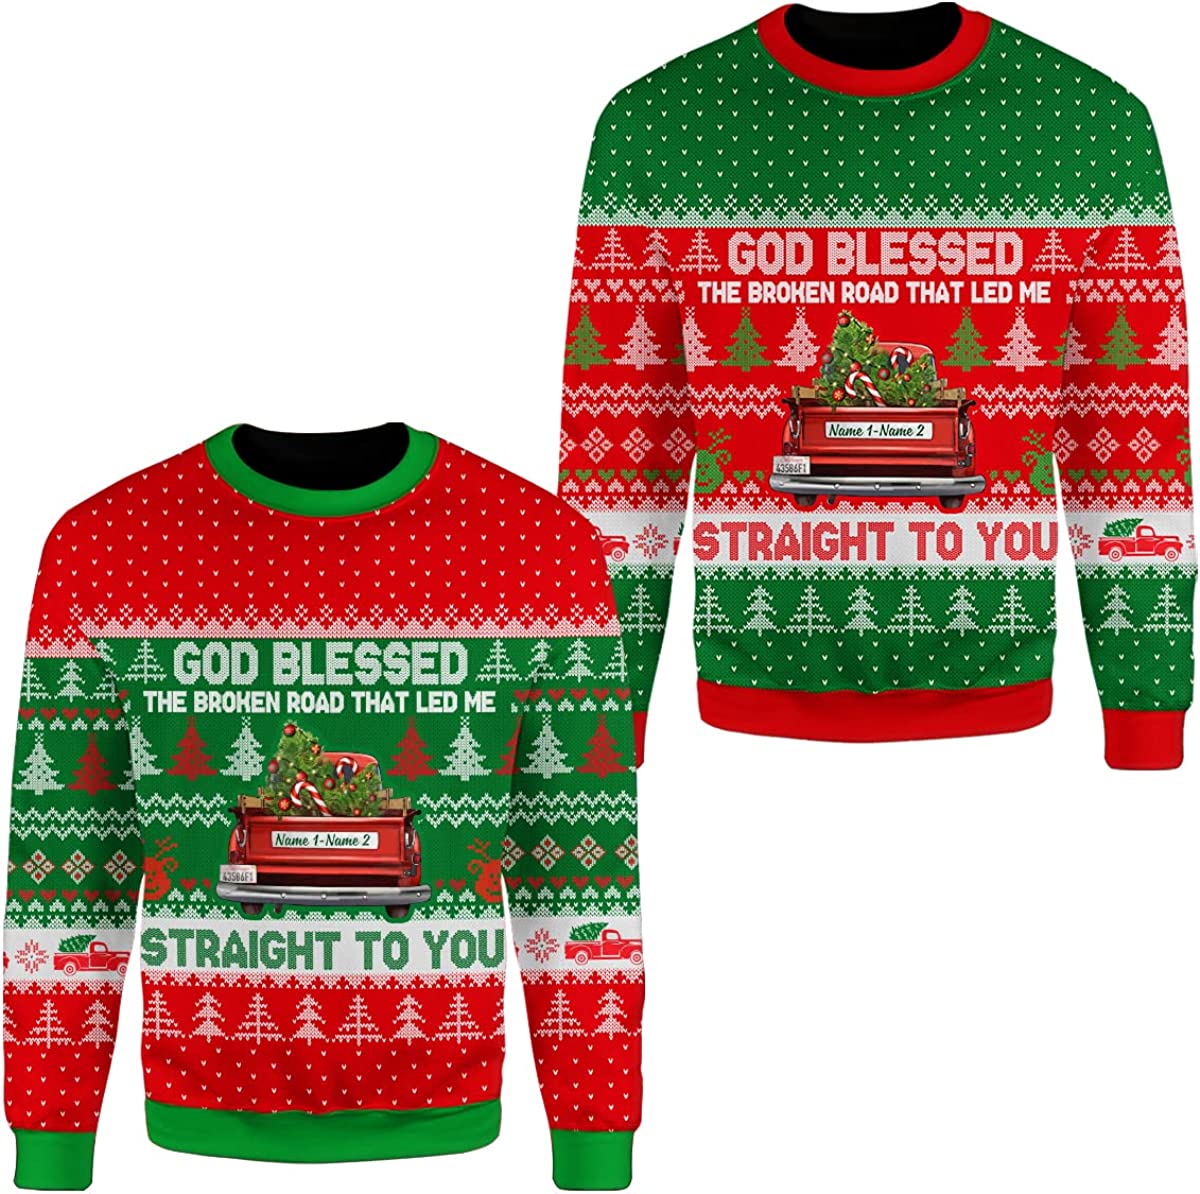 Personalized Name God Blessed The Broken Road That Led Me Straight to You SweatshirtUgly Christmas Sweater for Couple